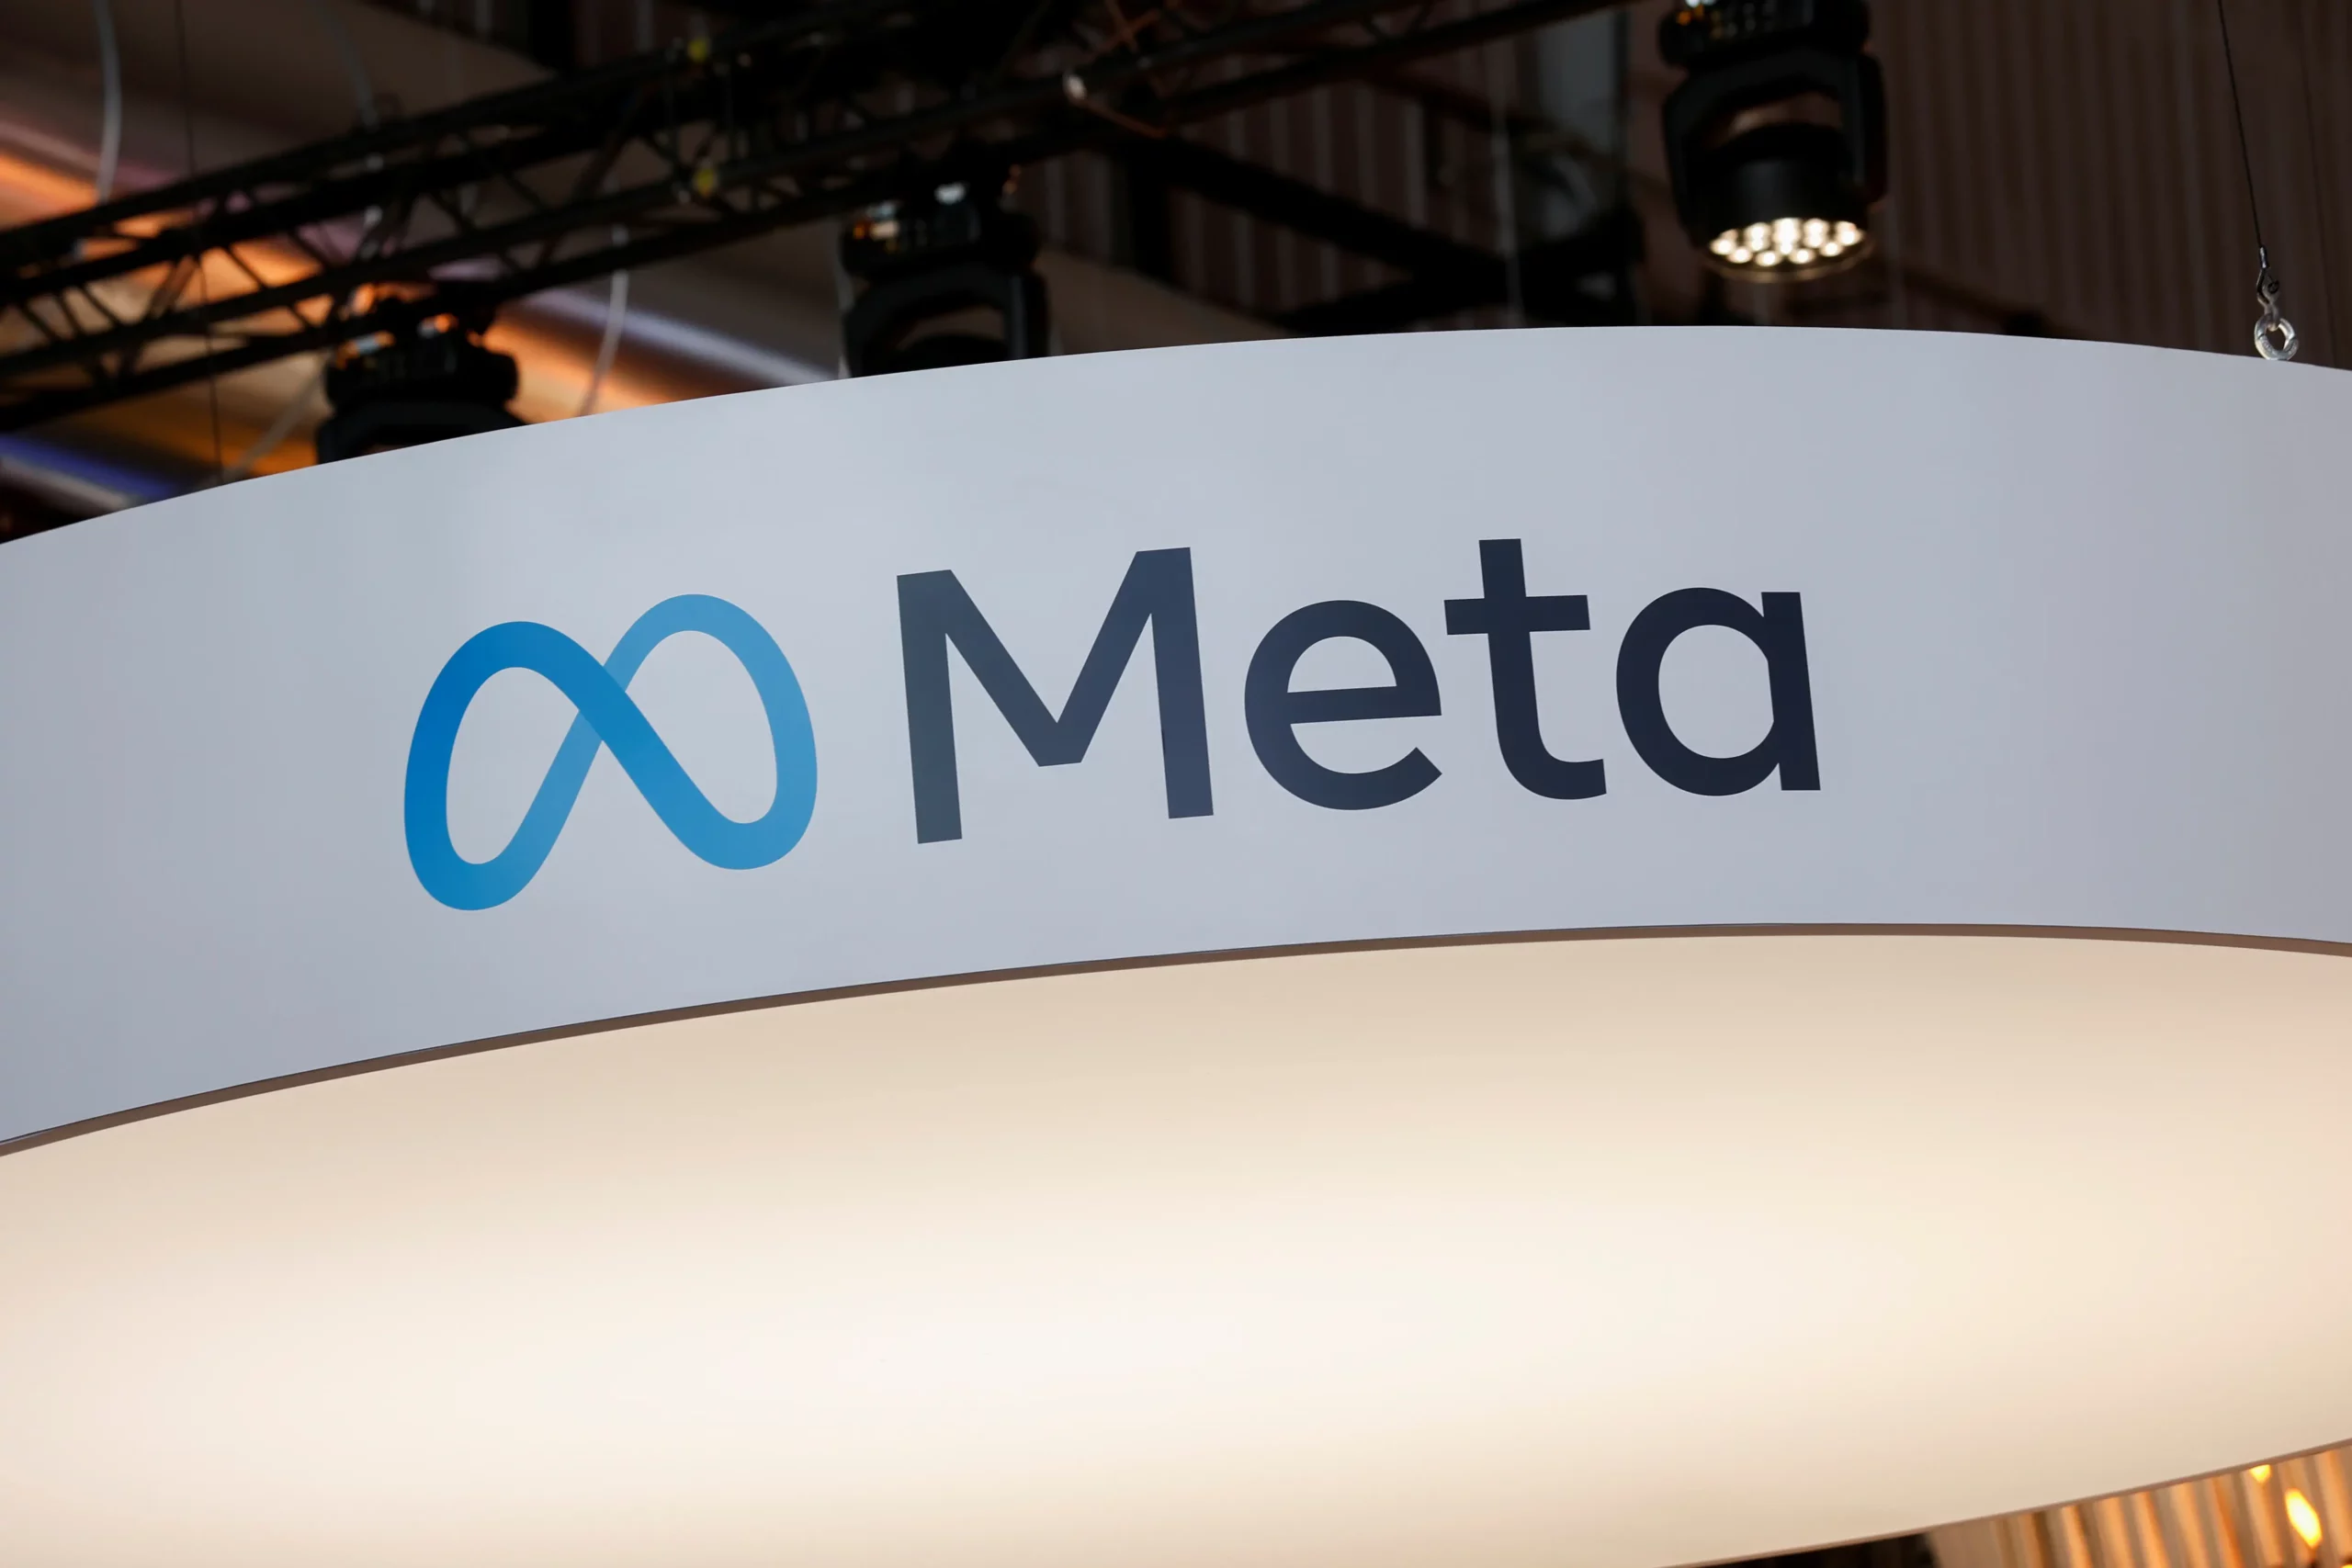 A US judge is set to address Meta’s privacy dispute with the FTC in February